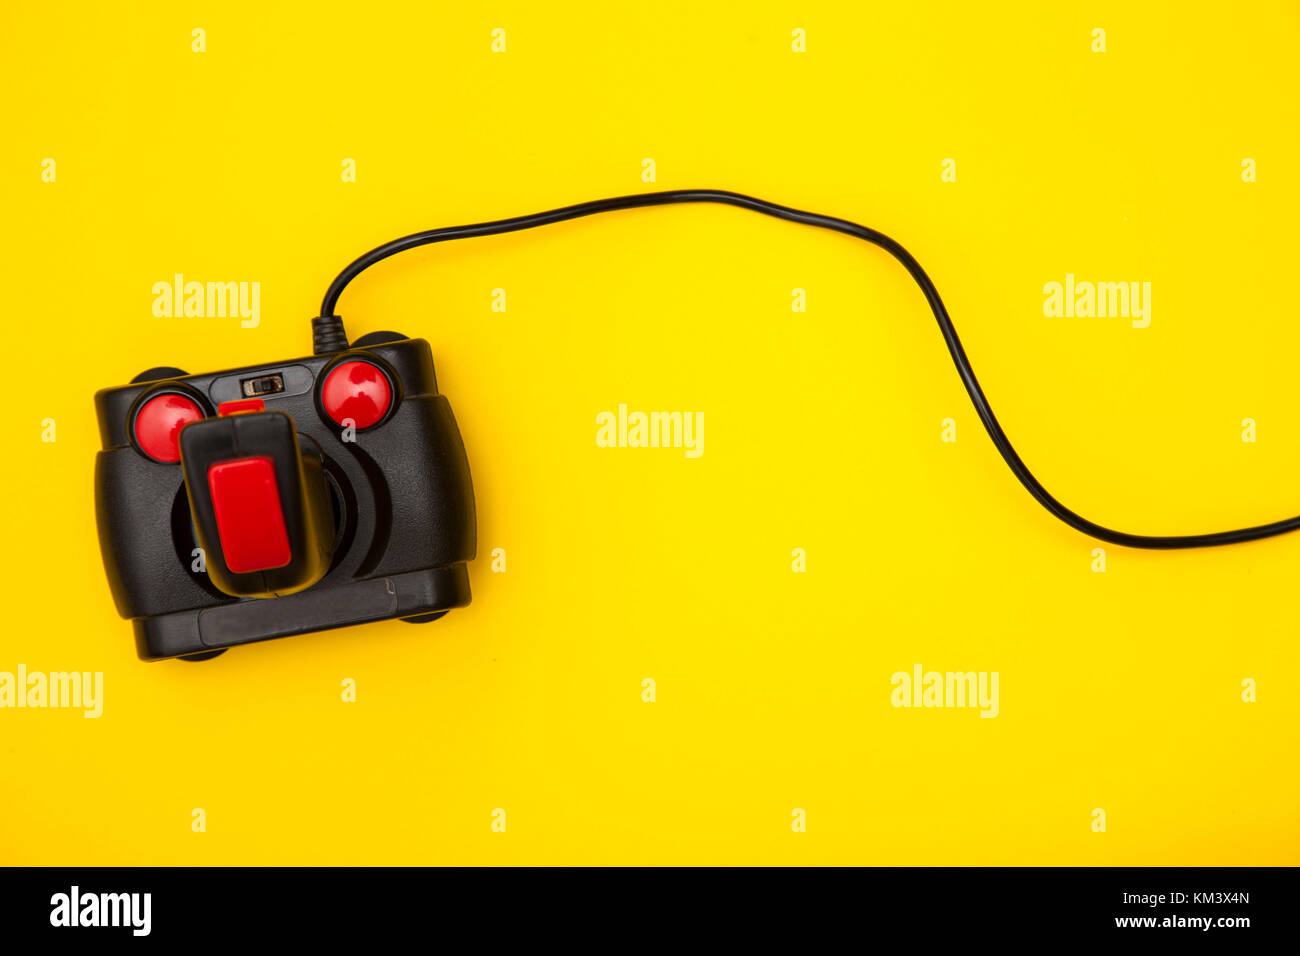 Retro computer gaming controller on a bright yellow background Stock Photo